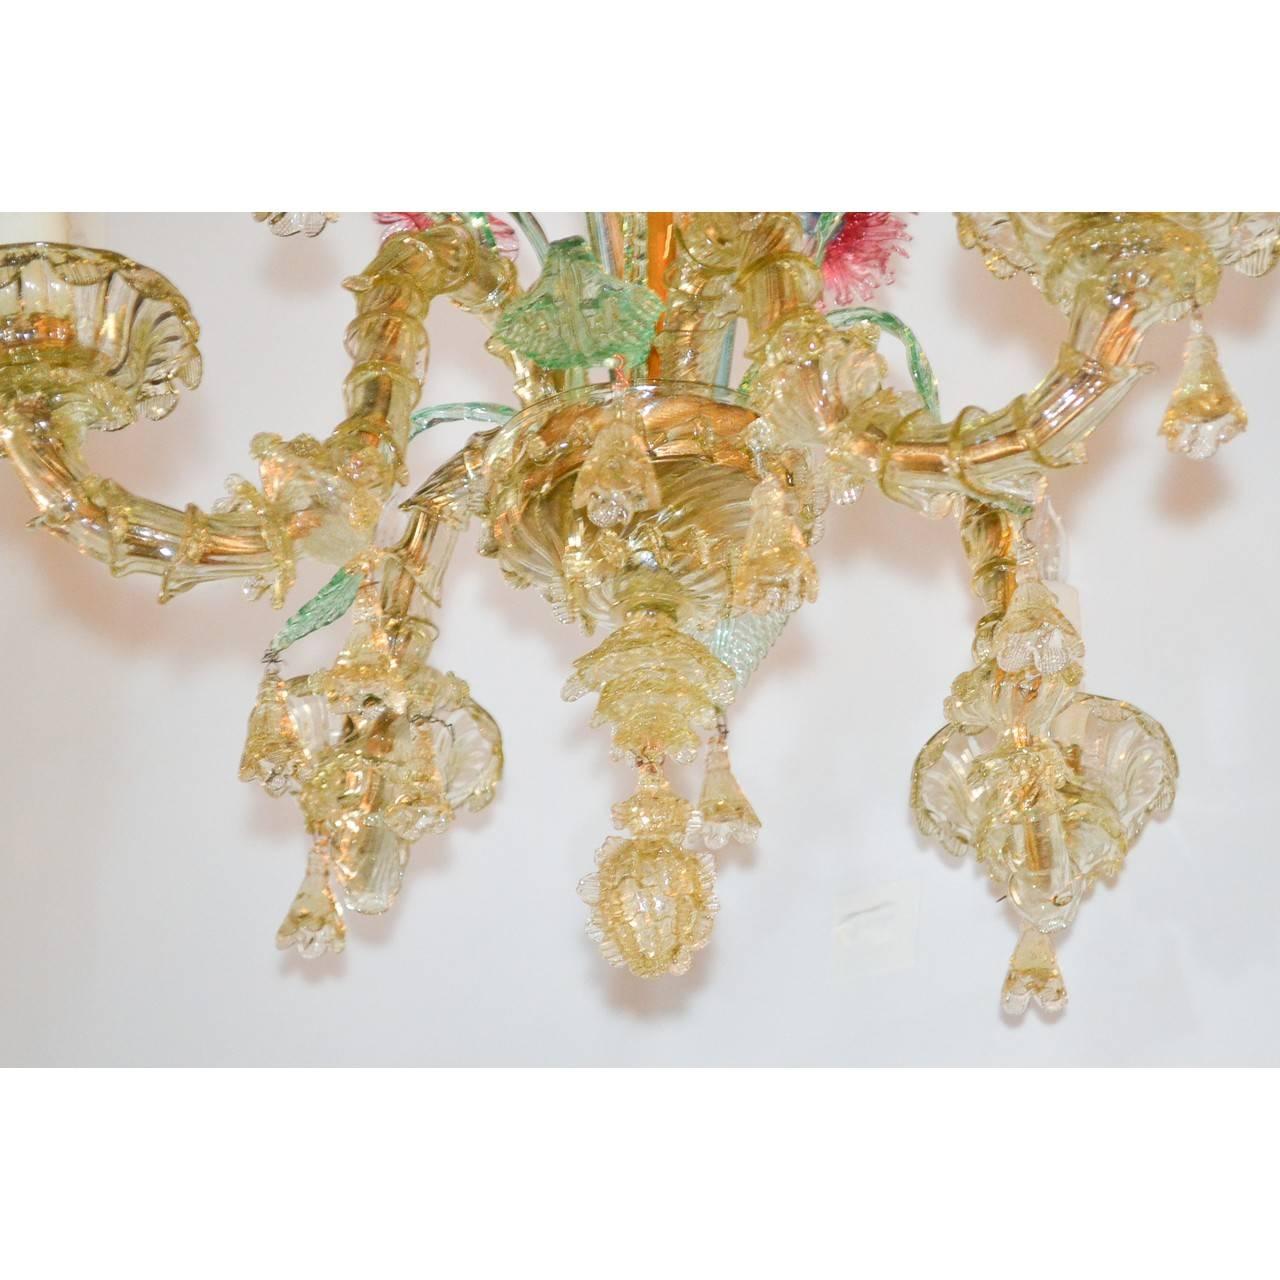 Exquisite four-light antique Murano chandelier handmade in Italy.
A multi colored jewel! Ready to install,
circa 1920.

Measure: 23 inches height x 24 inches wide.